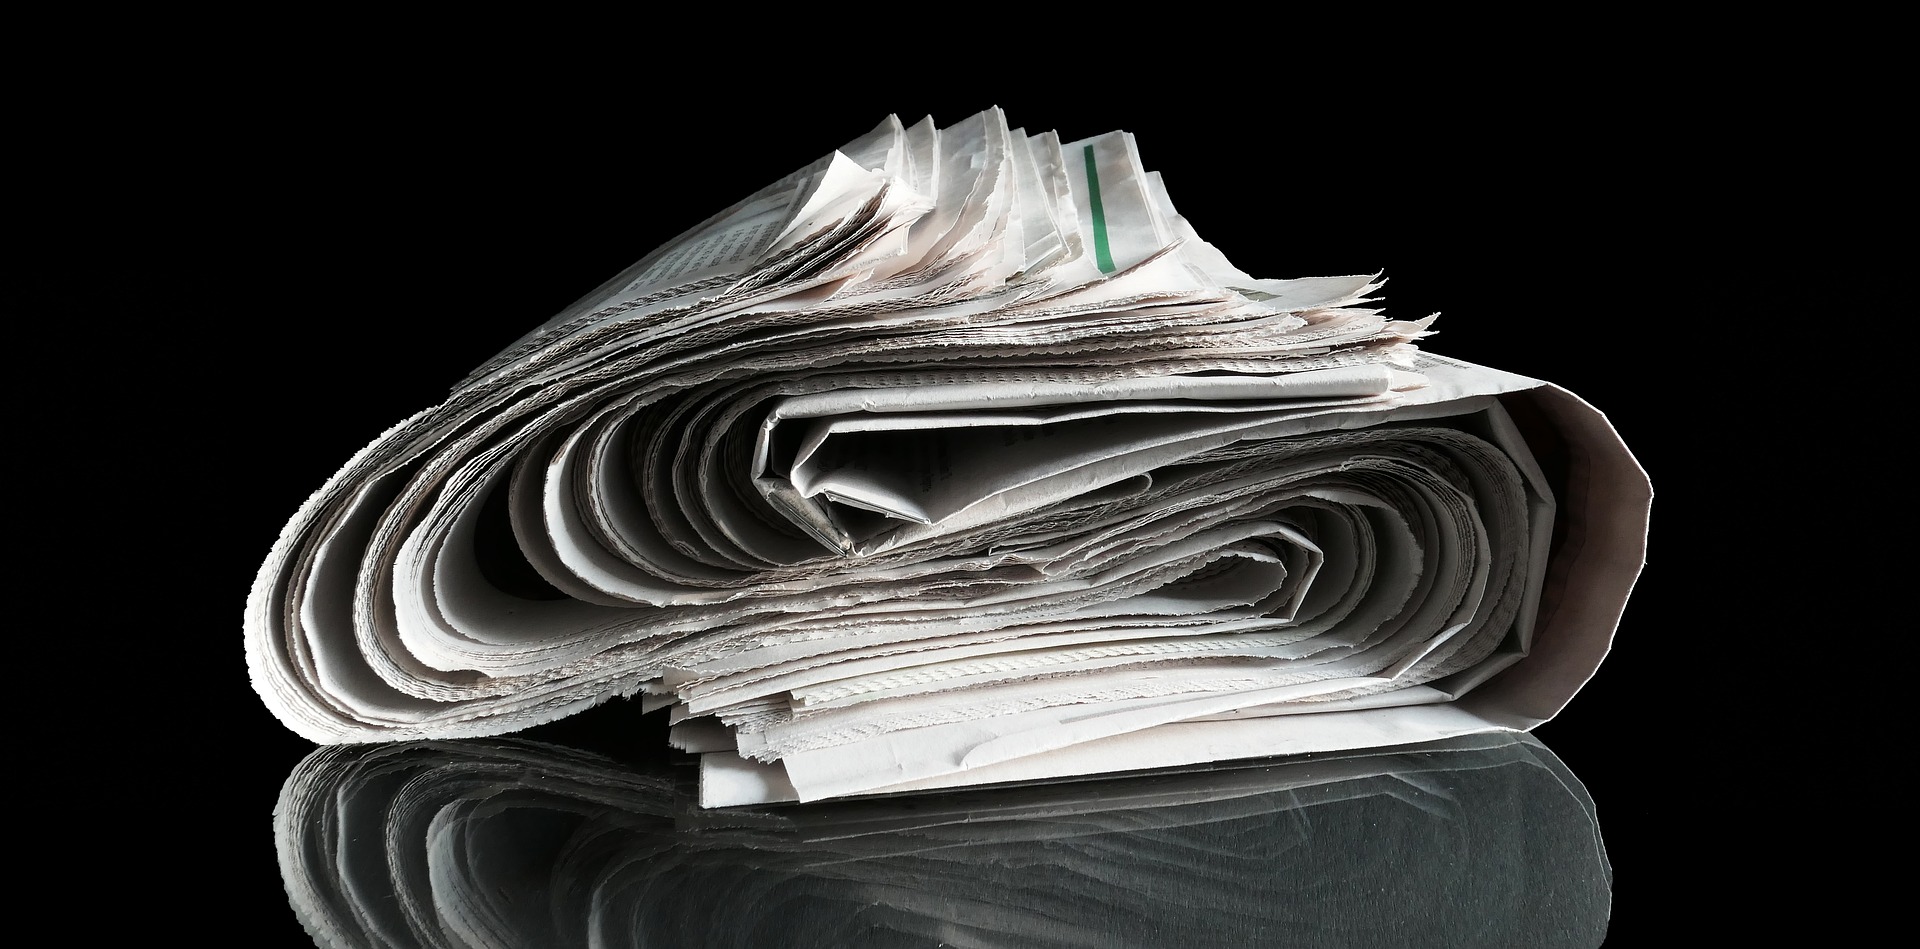 Newspaper rolled in S-curve on black background